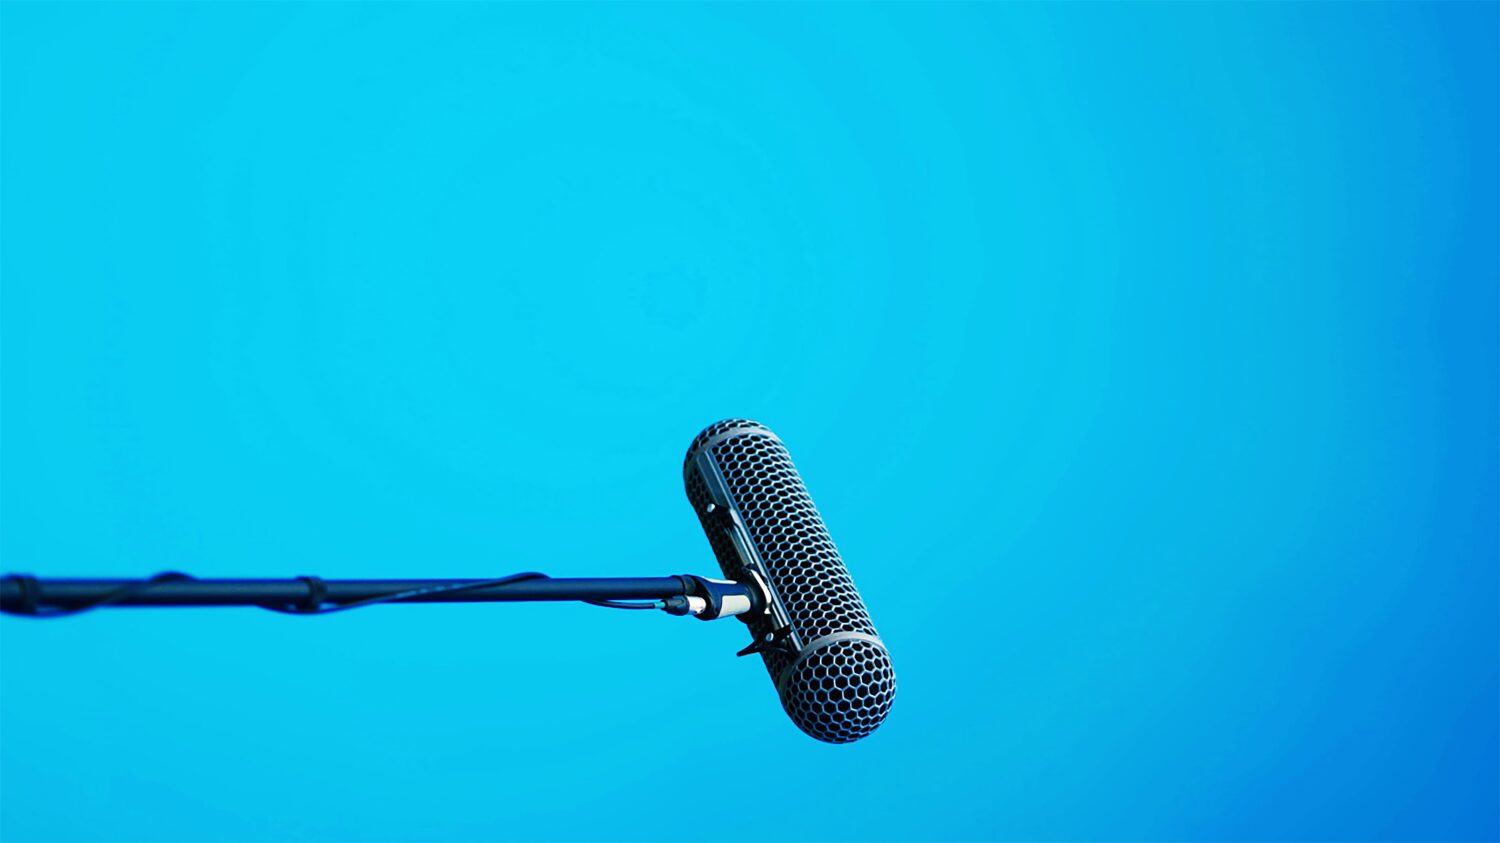 Horizontal microphone on stand over light blue background